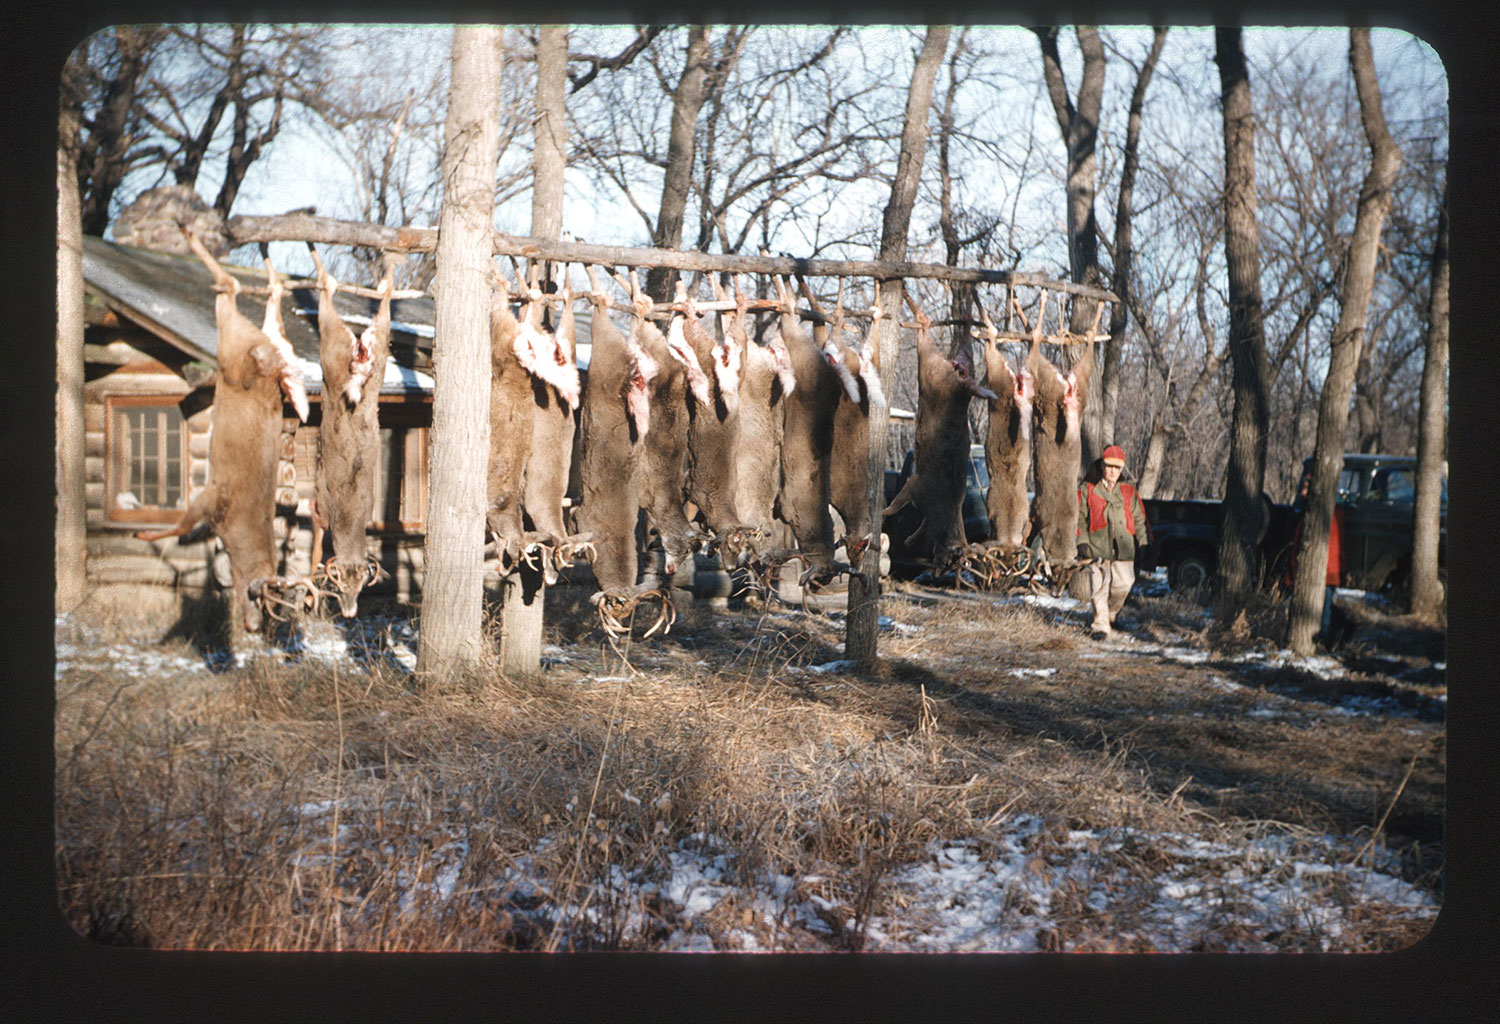 1939 Kodachrome transparency of deer hanging from wooden rack